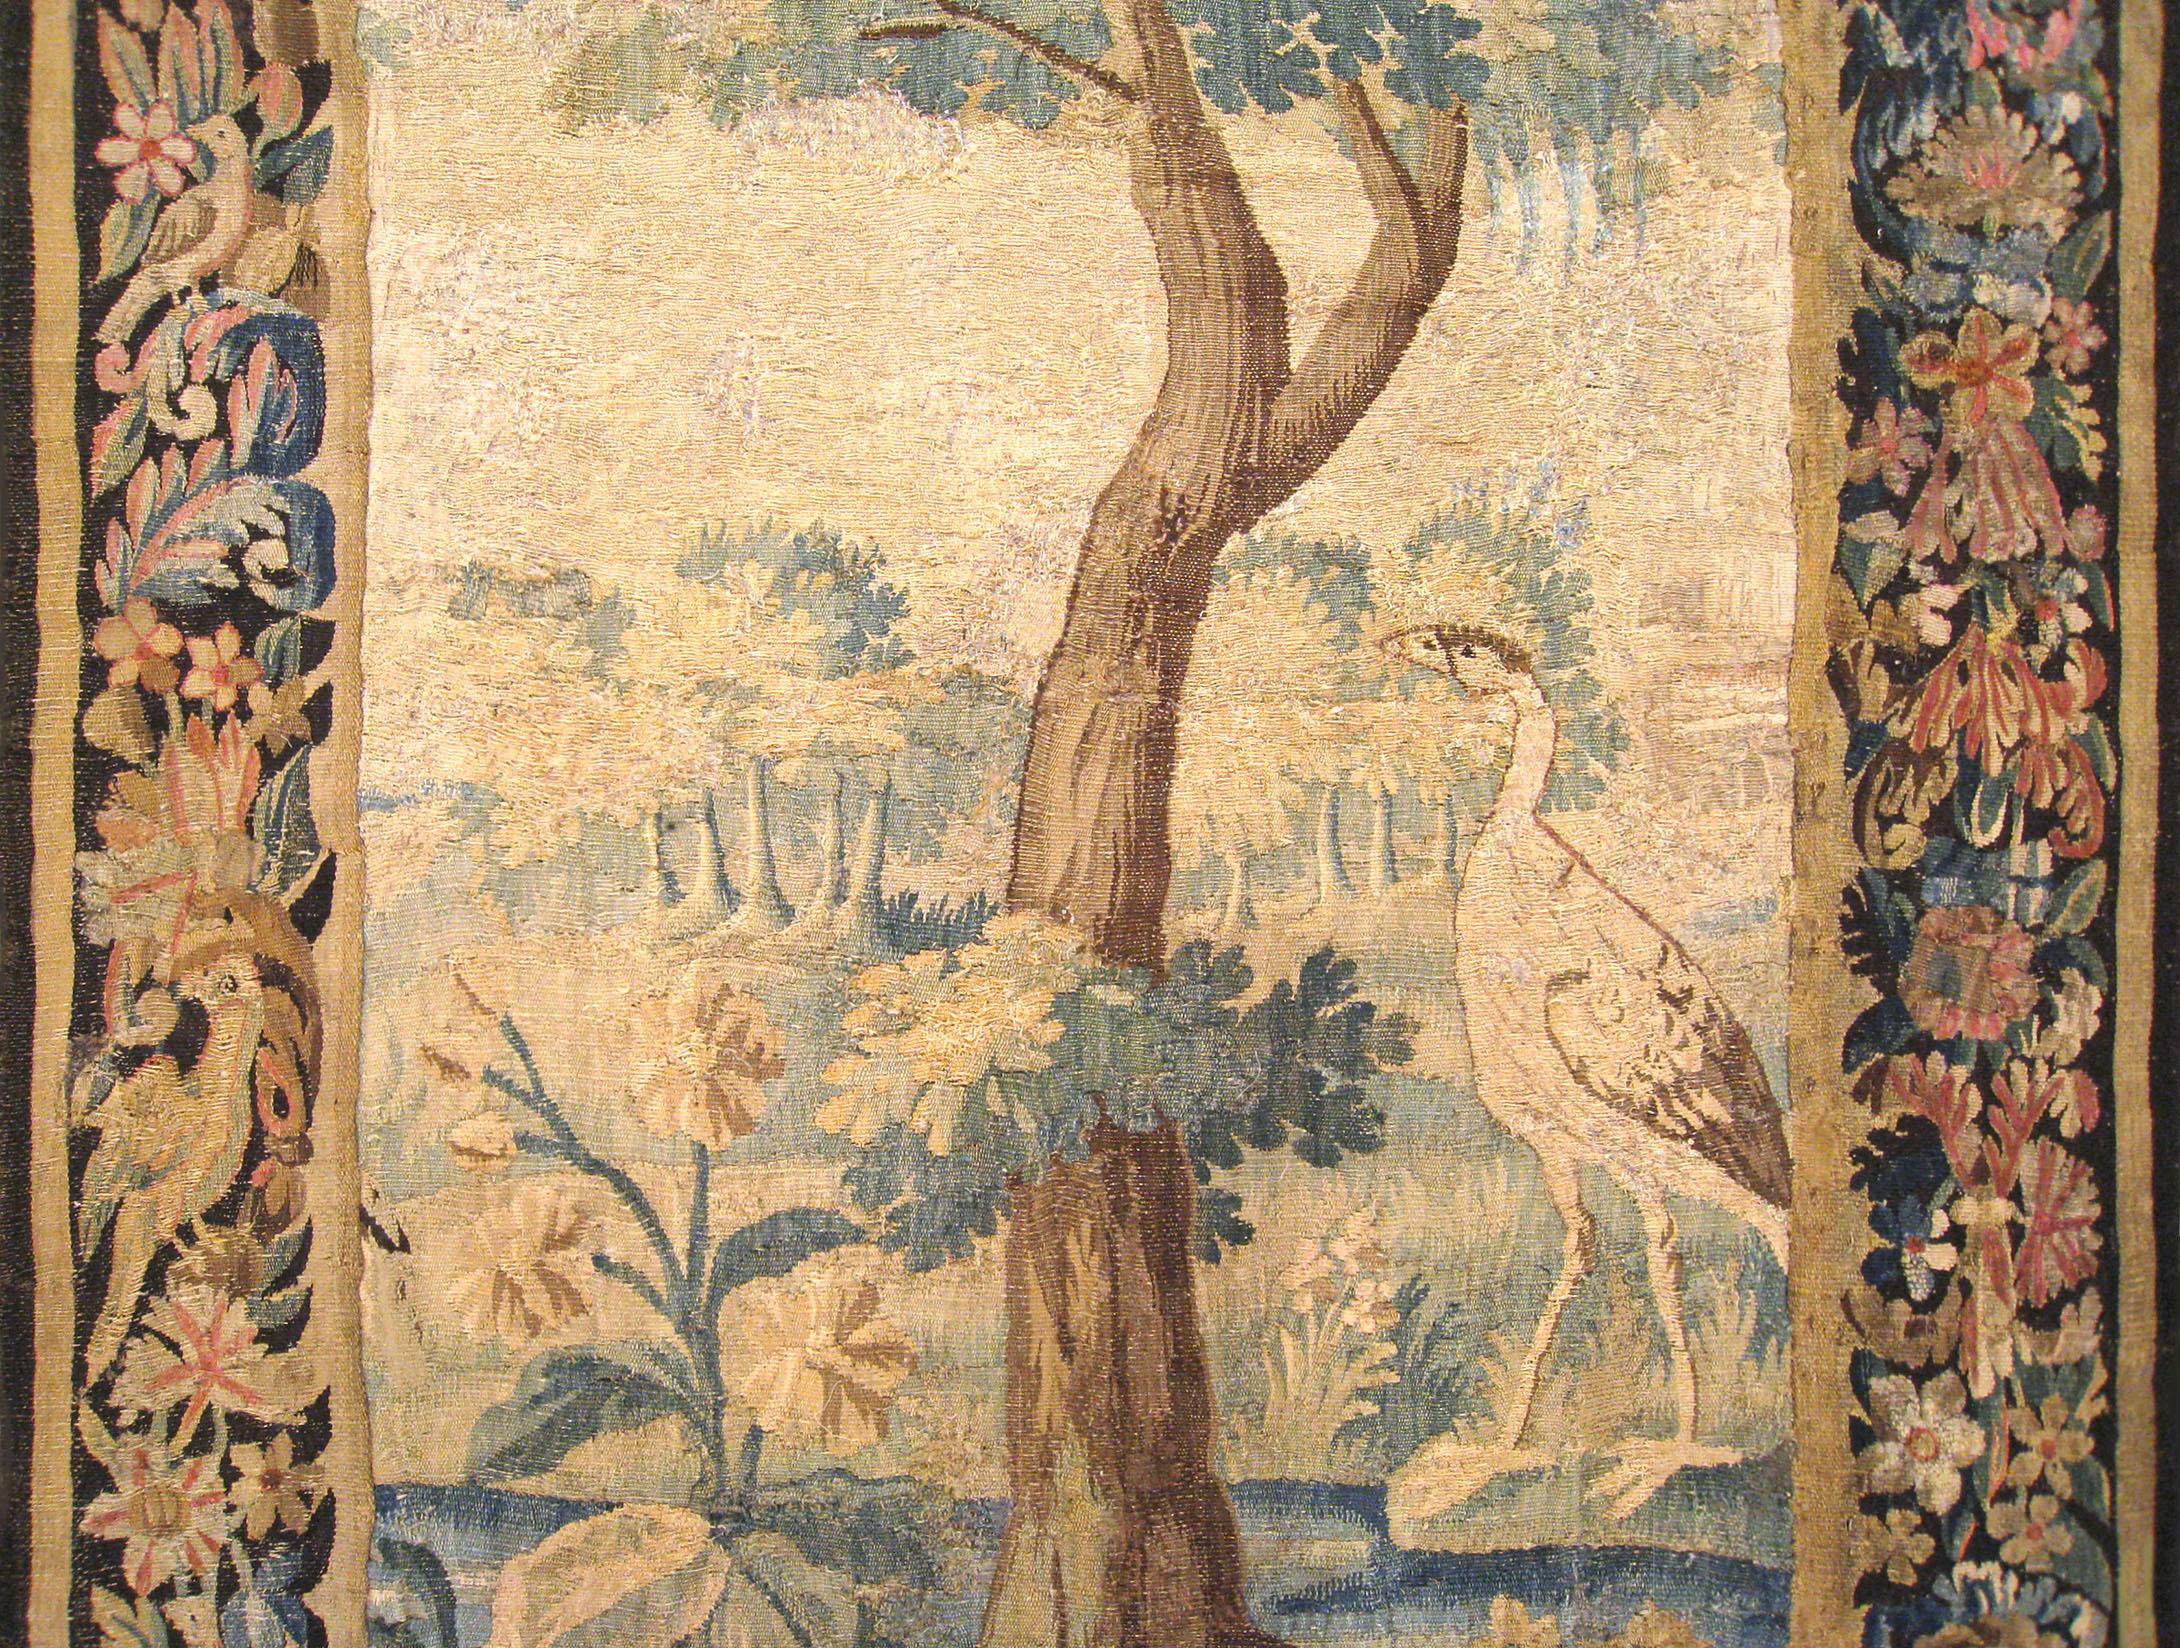 Hand-Woven Flemish Verdure Landscape Tapestry Panel, with Large Tree and Foliate Border